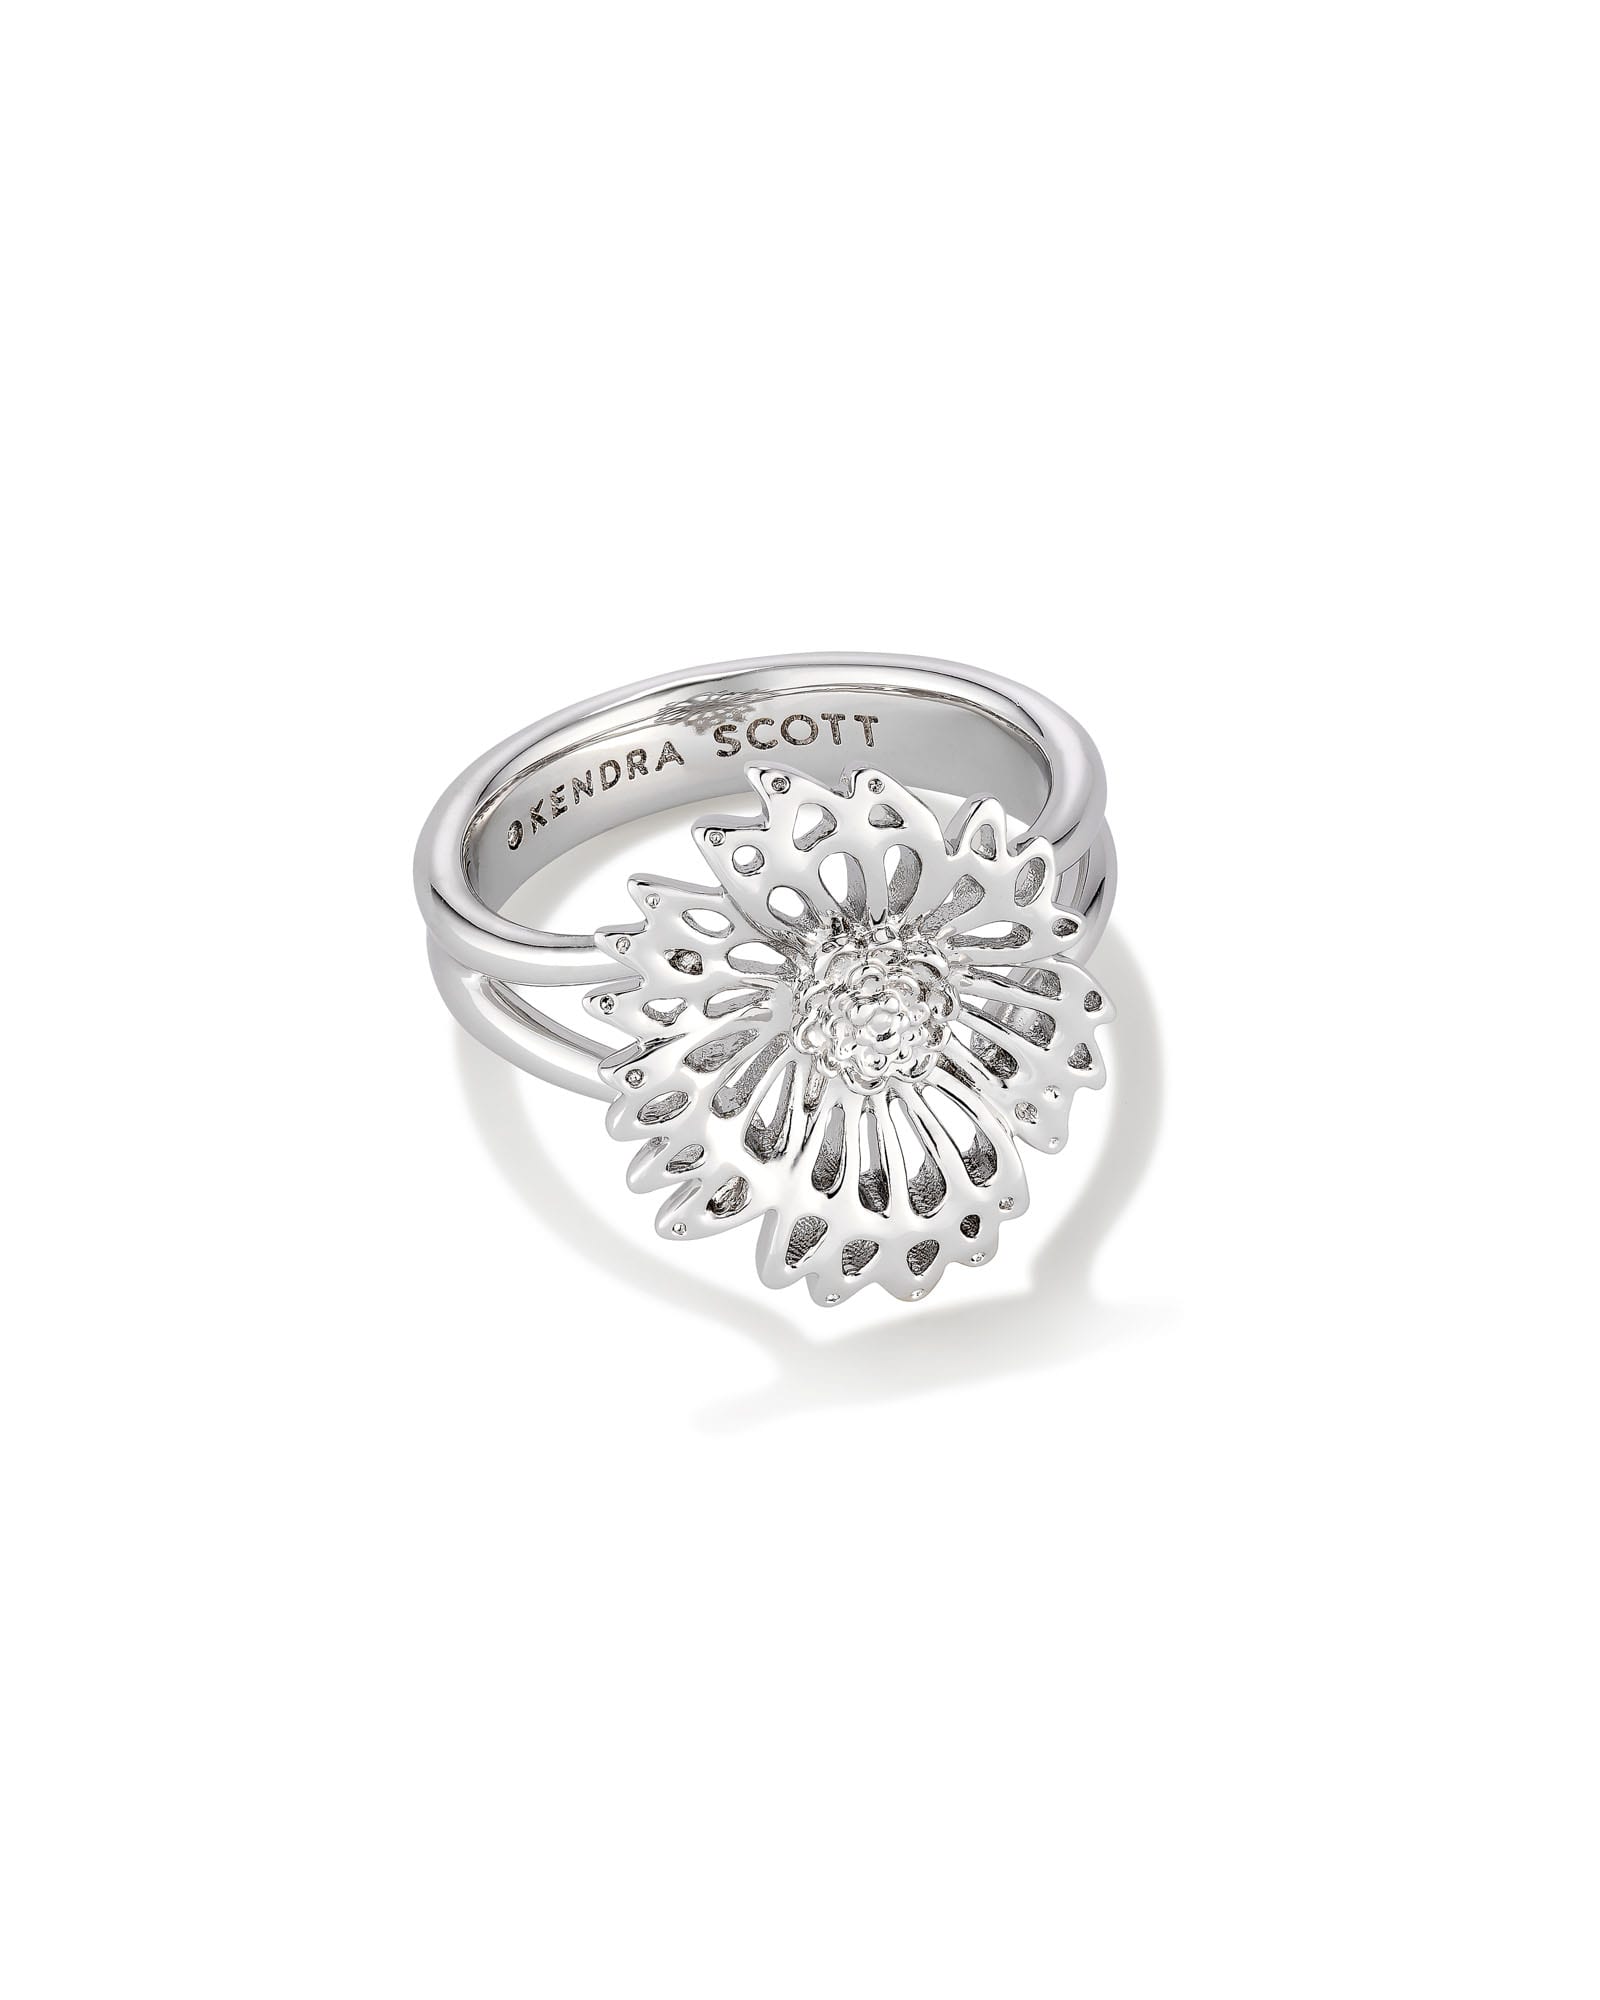 Kendra Scott Brielle Band Ring in Silver | Plated Brass/Metal Rhodium